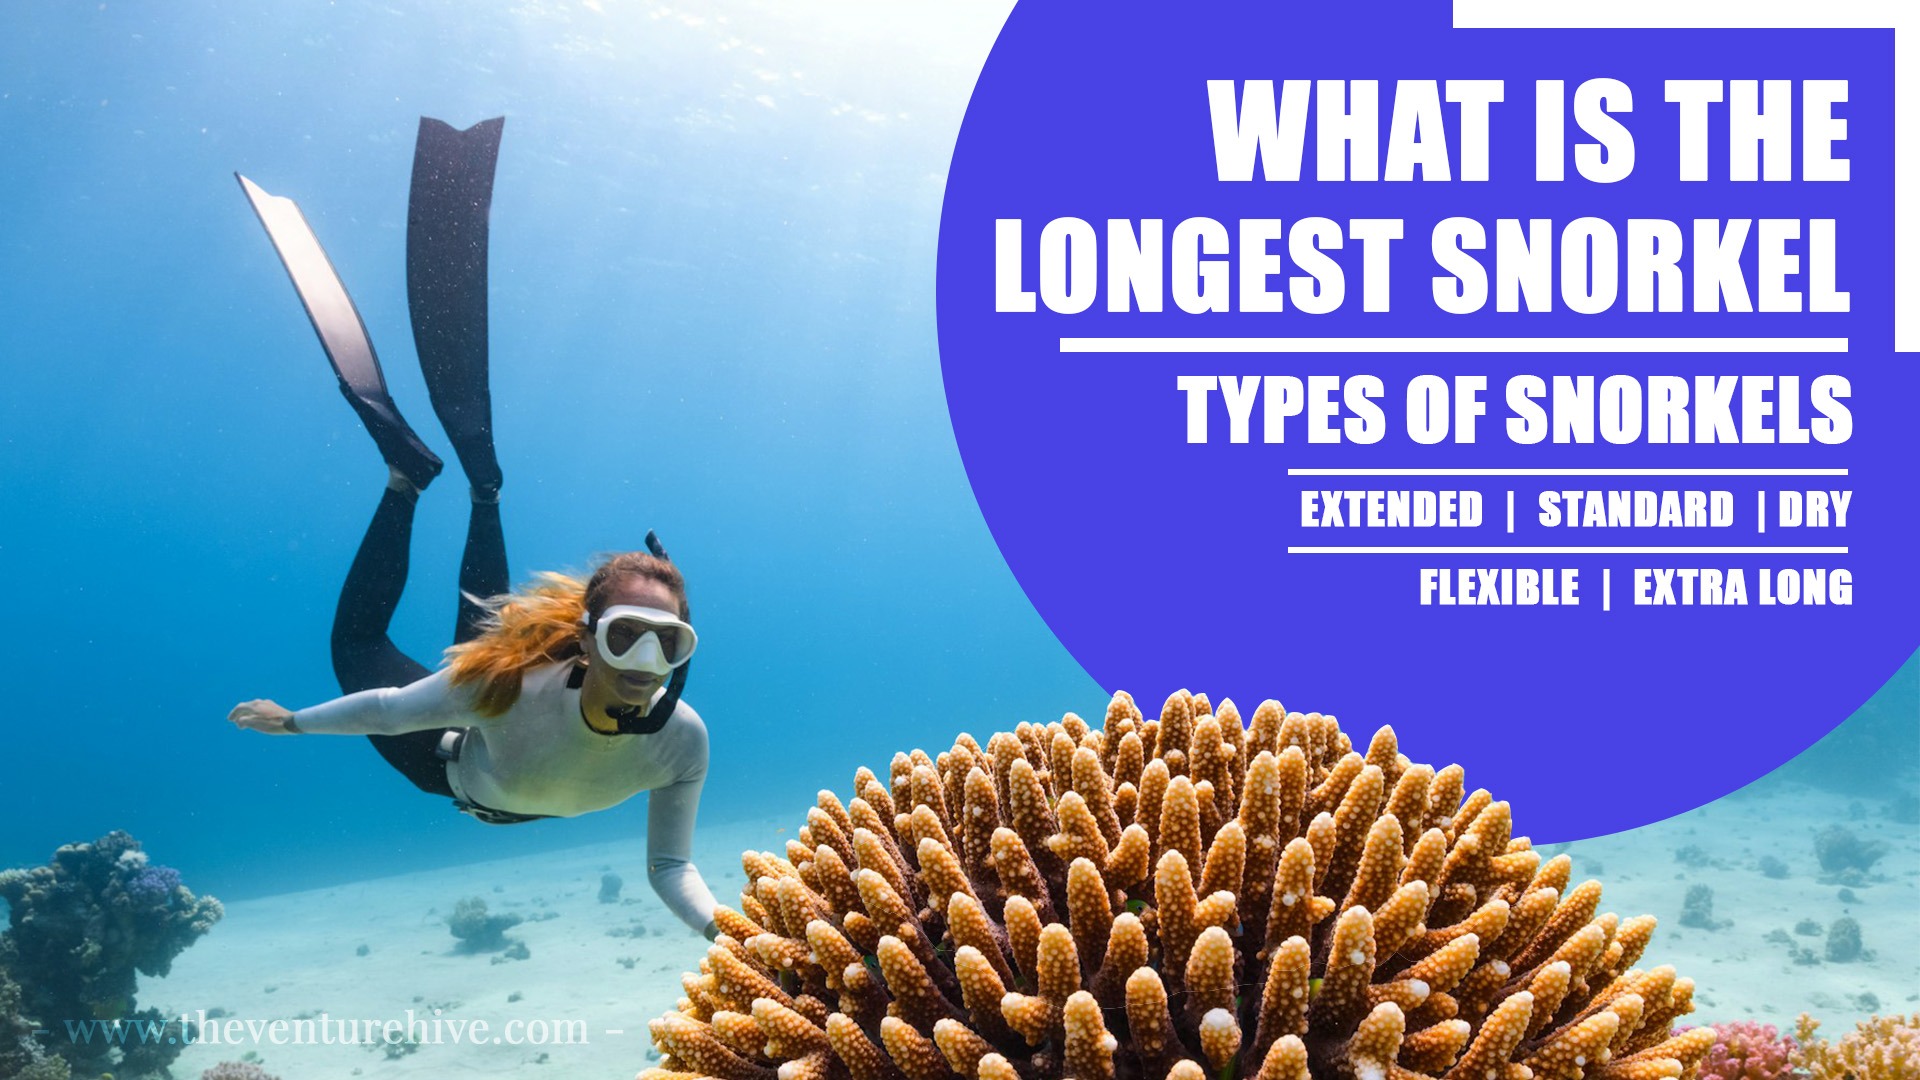 What Is The Longest Snorkel You Can Use?